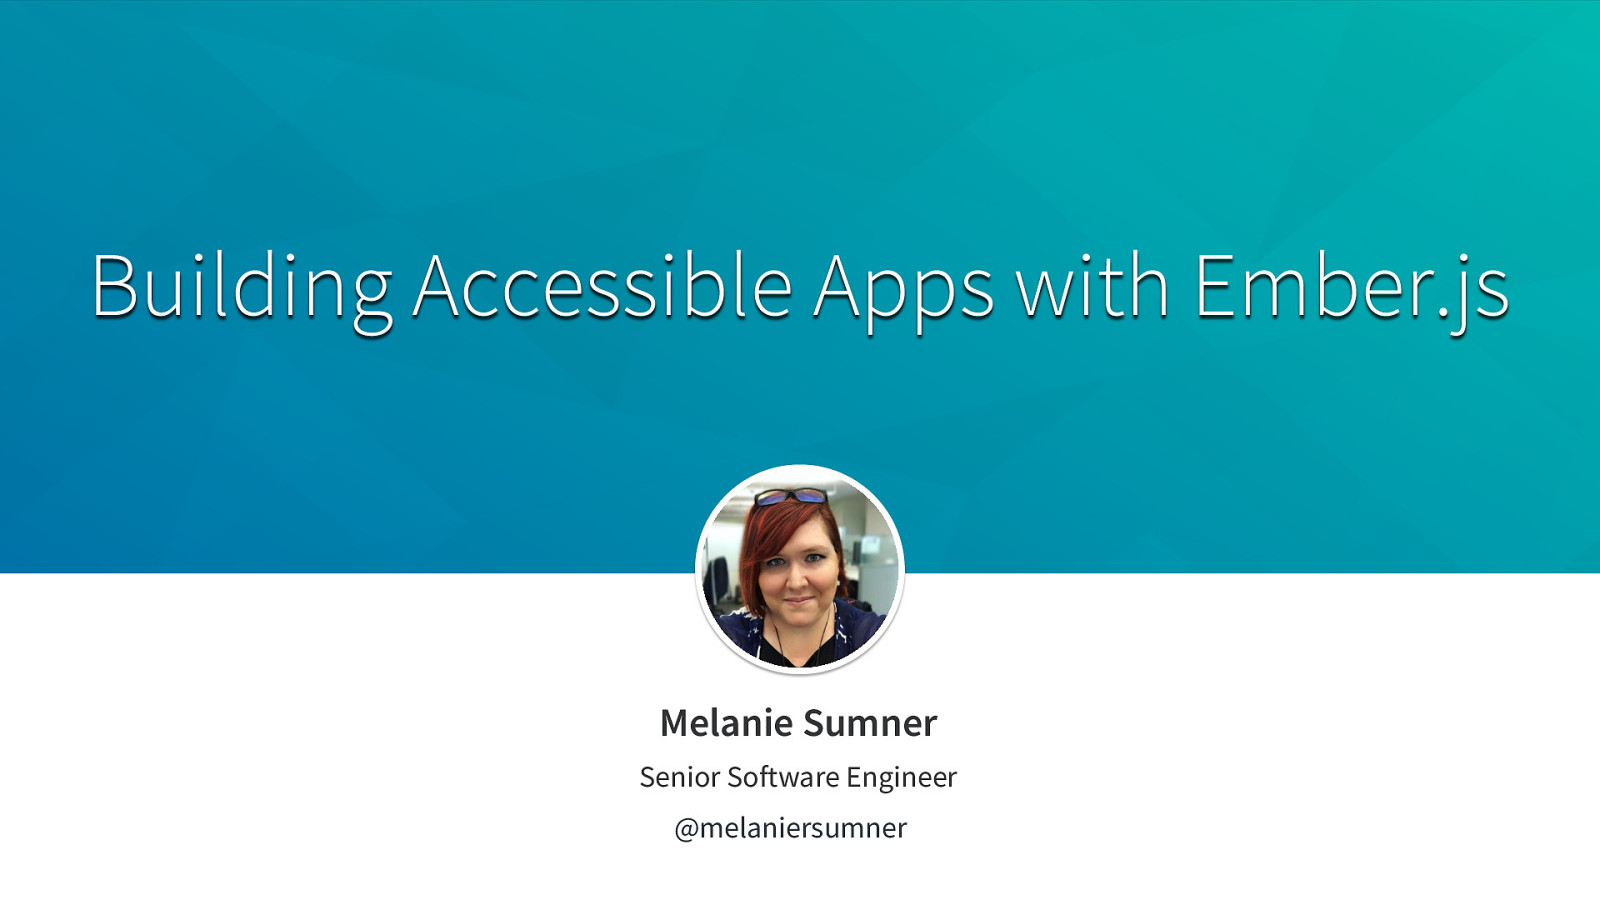 Building Accessible Applications with Ember.js